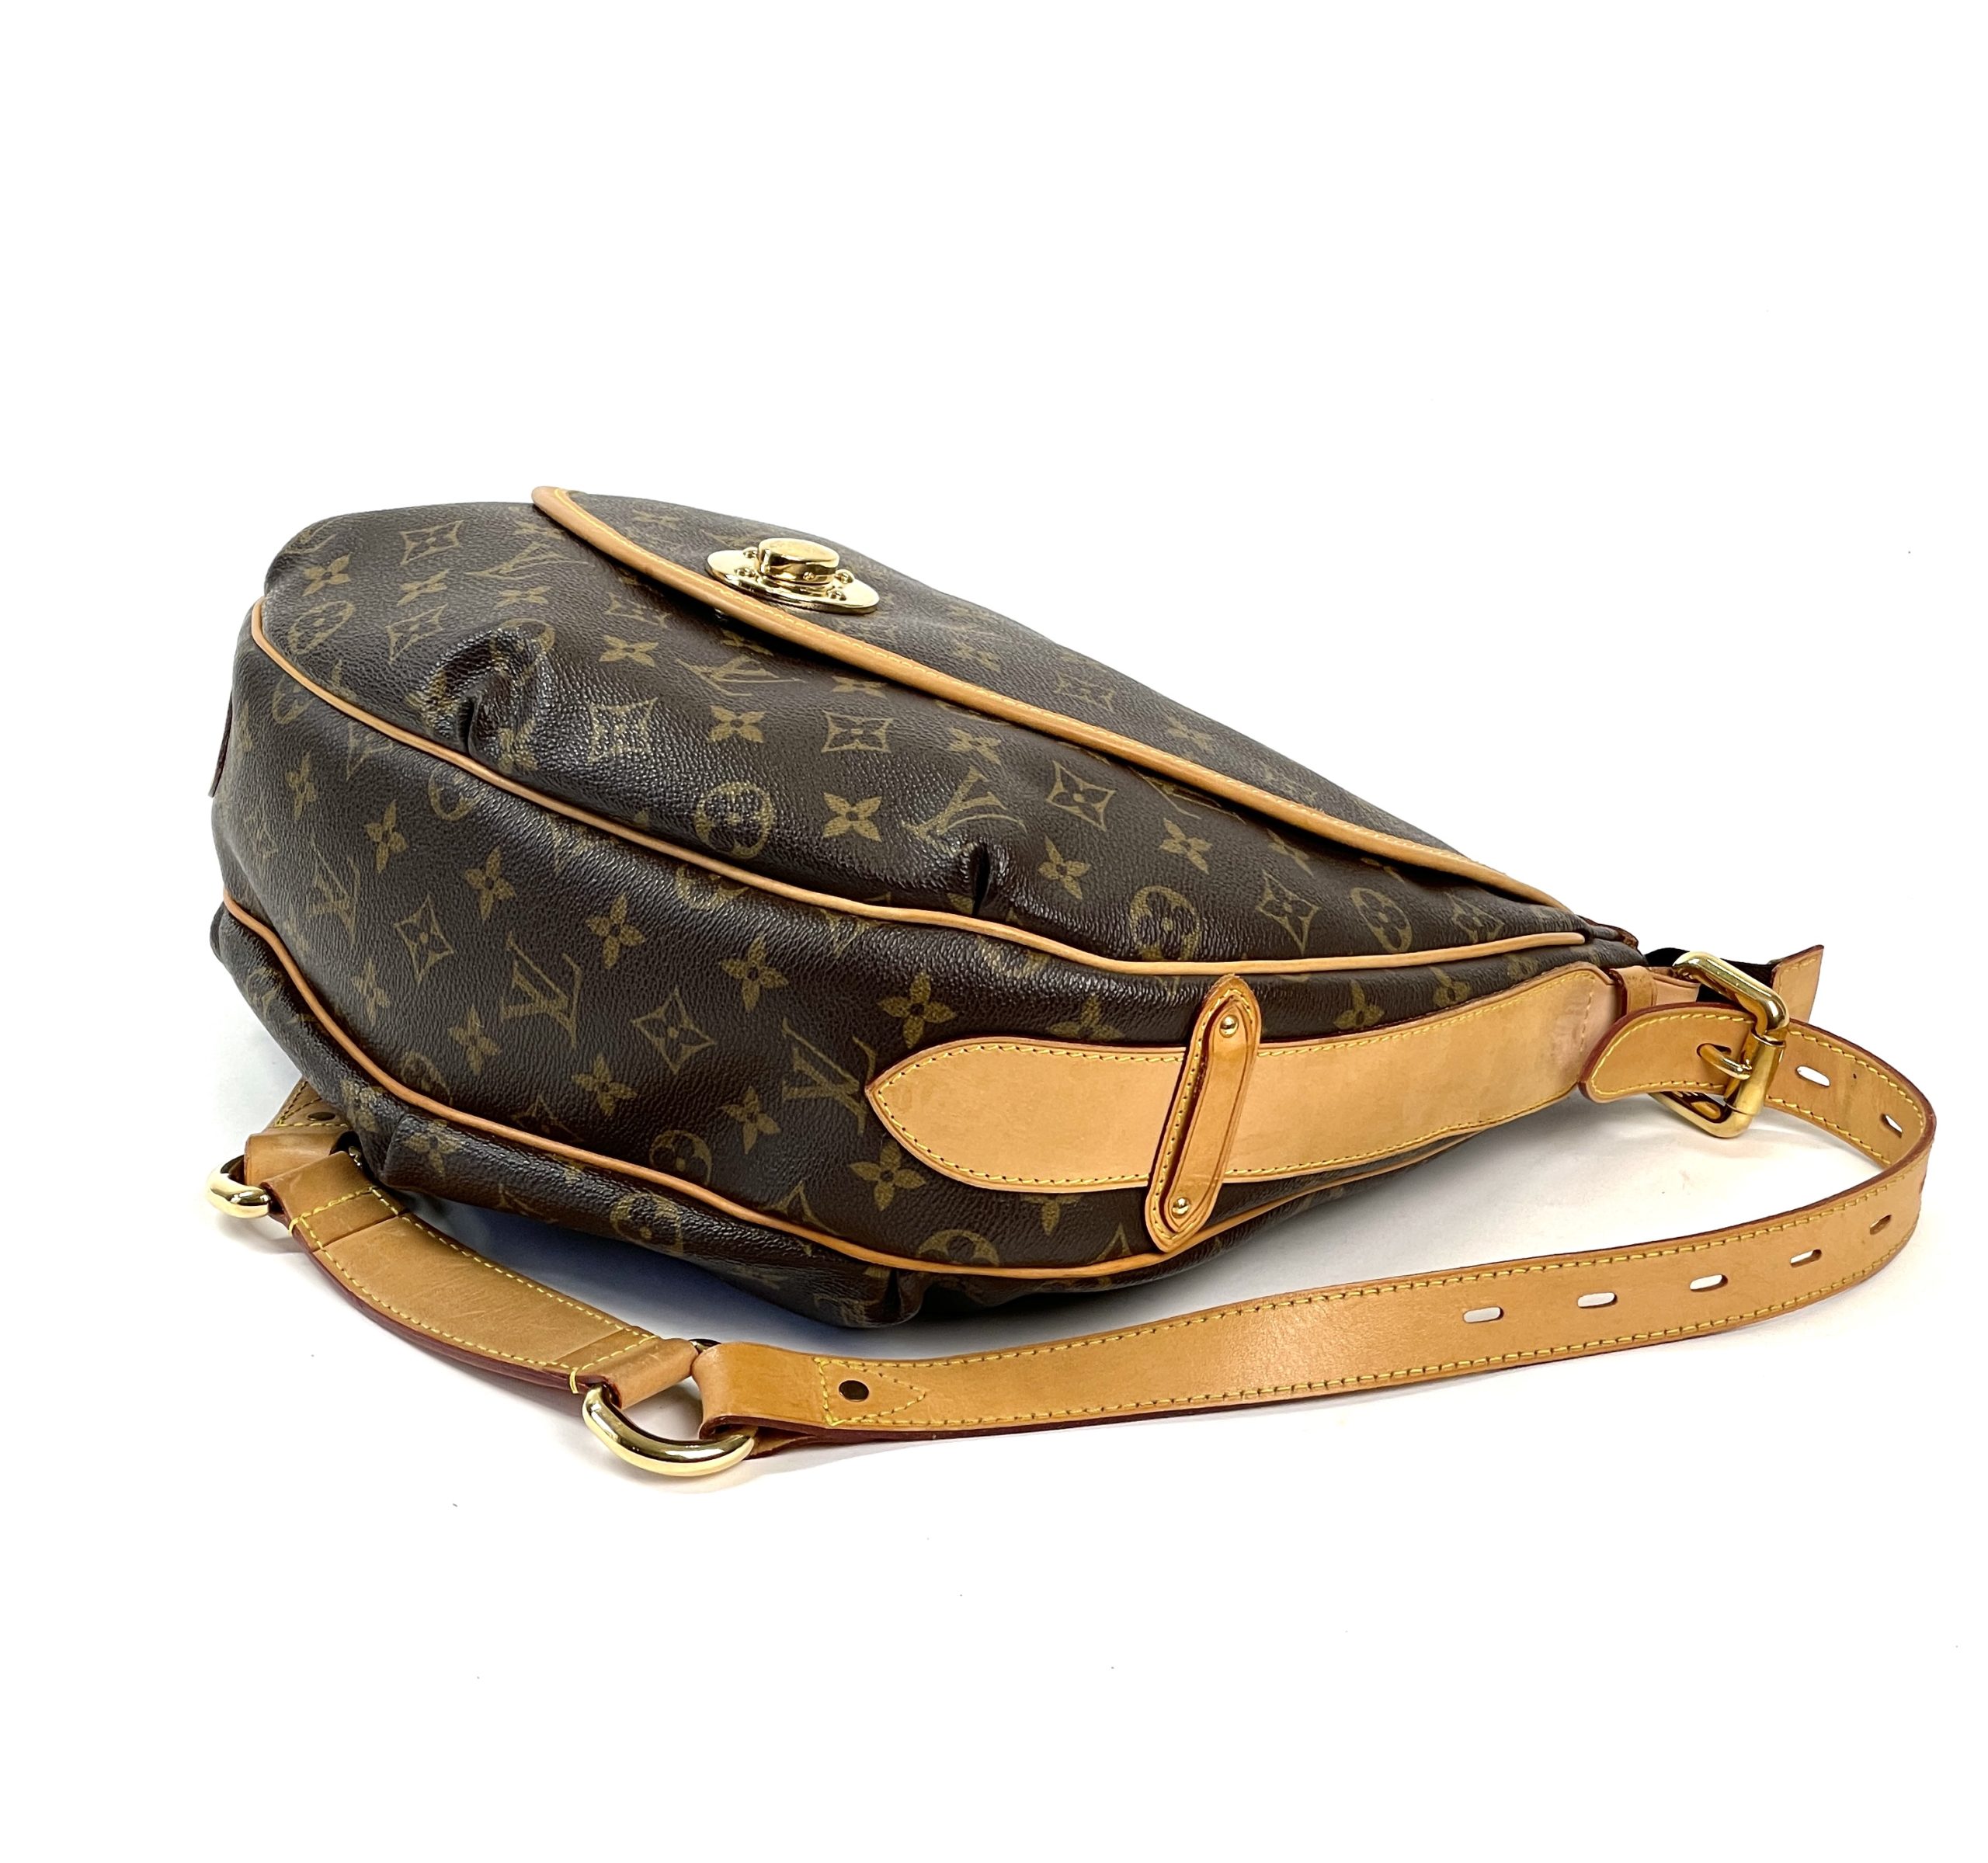 What Goes Around Comes Around Louis Vuitton Monogram Tulum Gm Bag in Brown